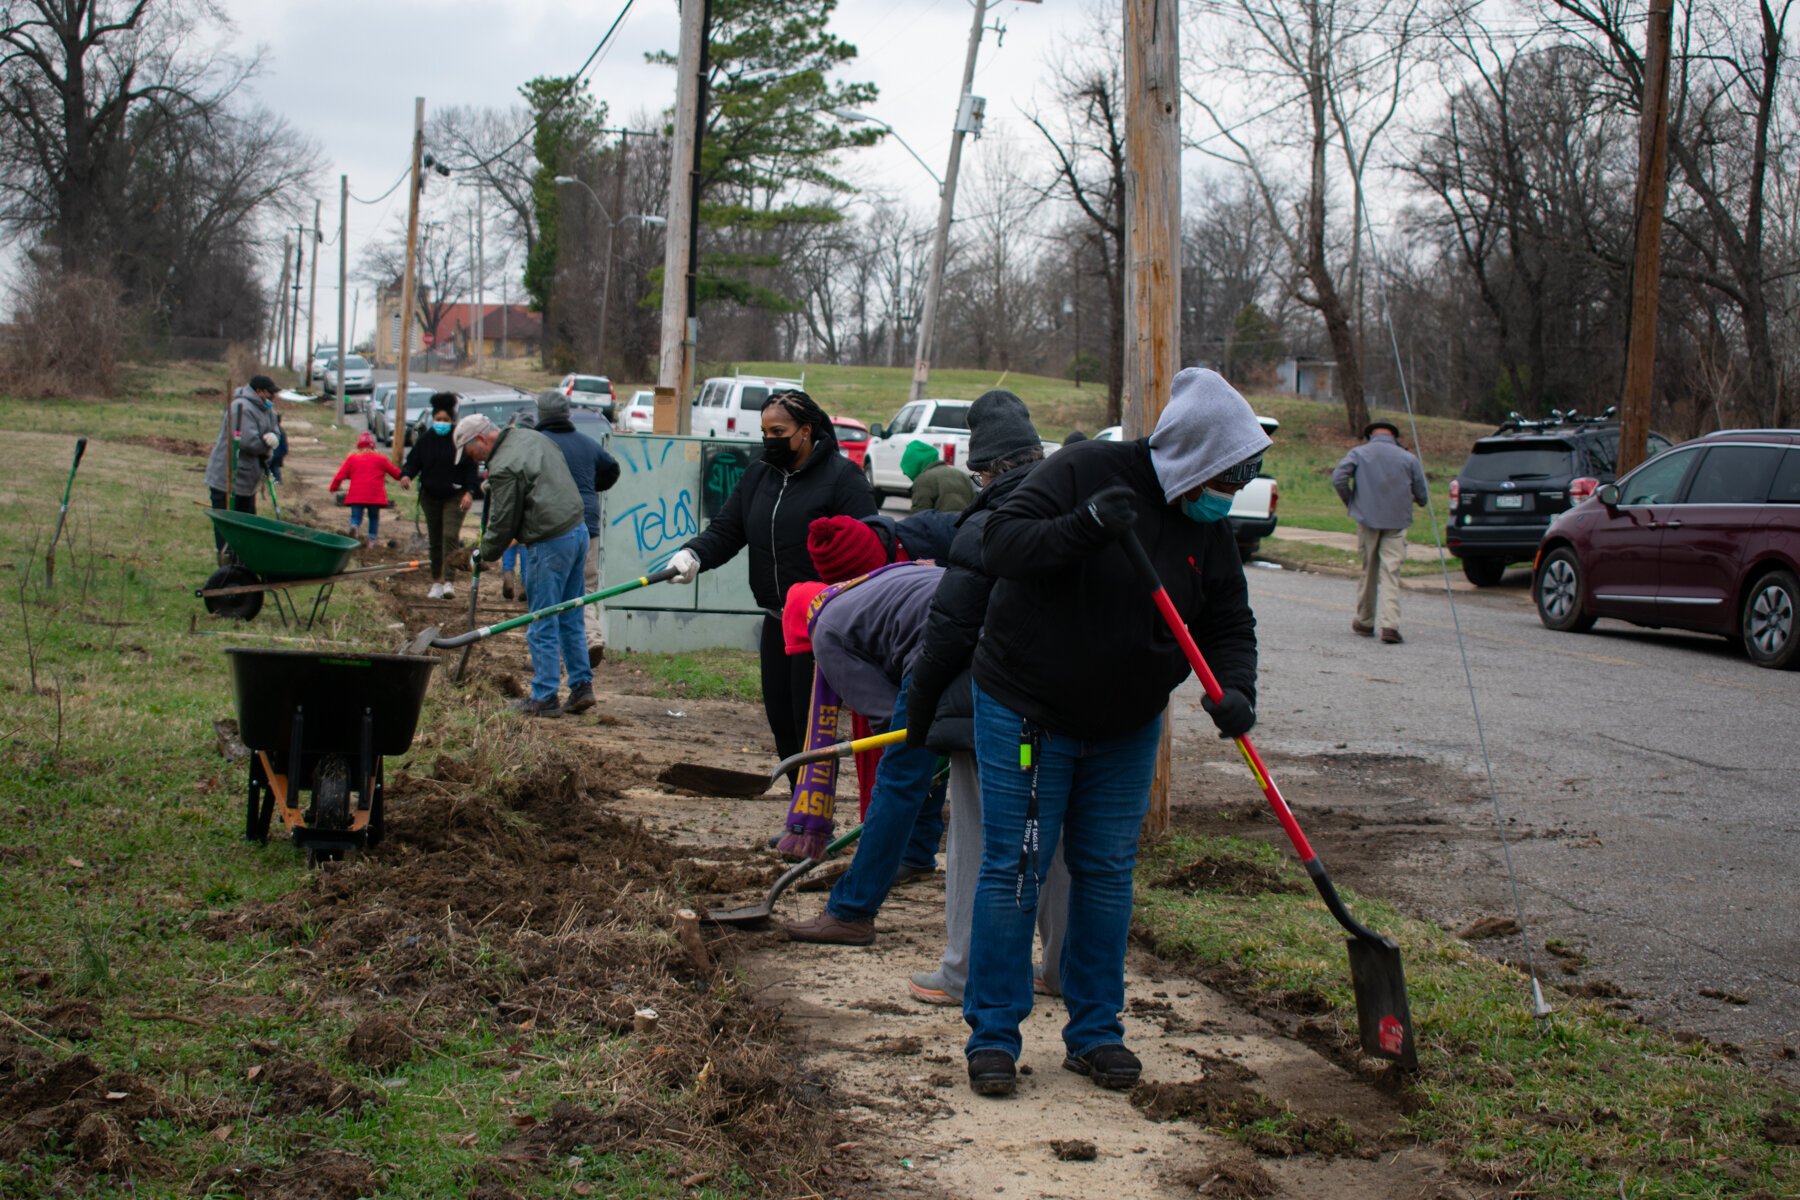 Volunteers with The Works CDC work together to clear a sidewalk along Jefferson Ave. (Sarah Rushakoff)